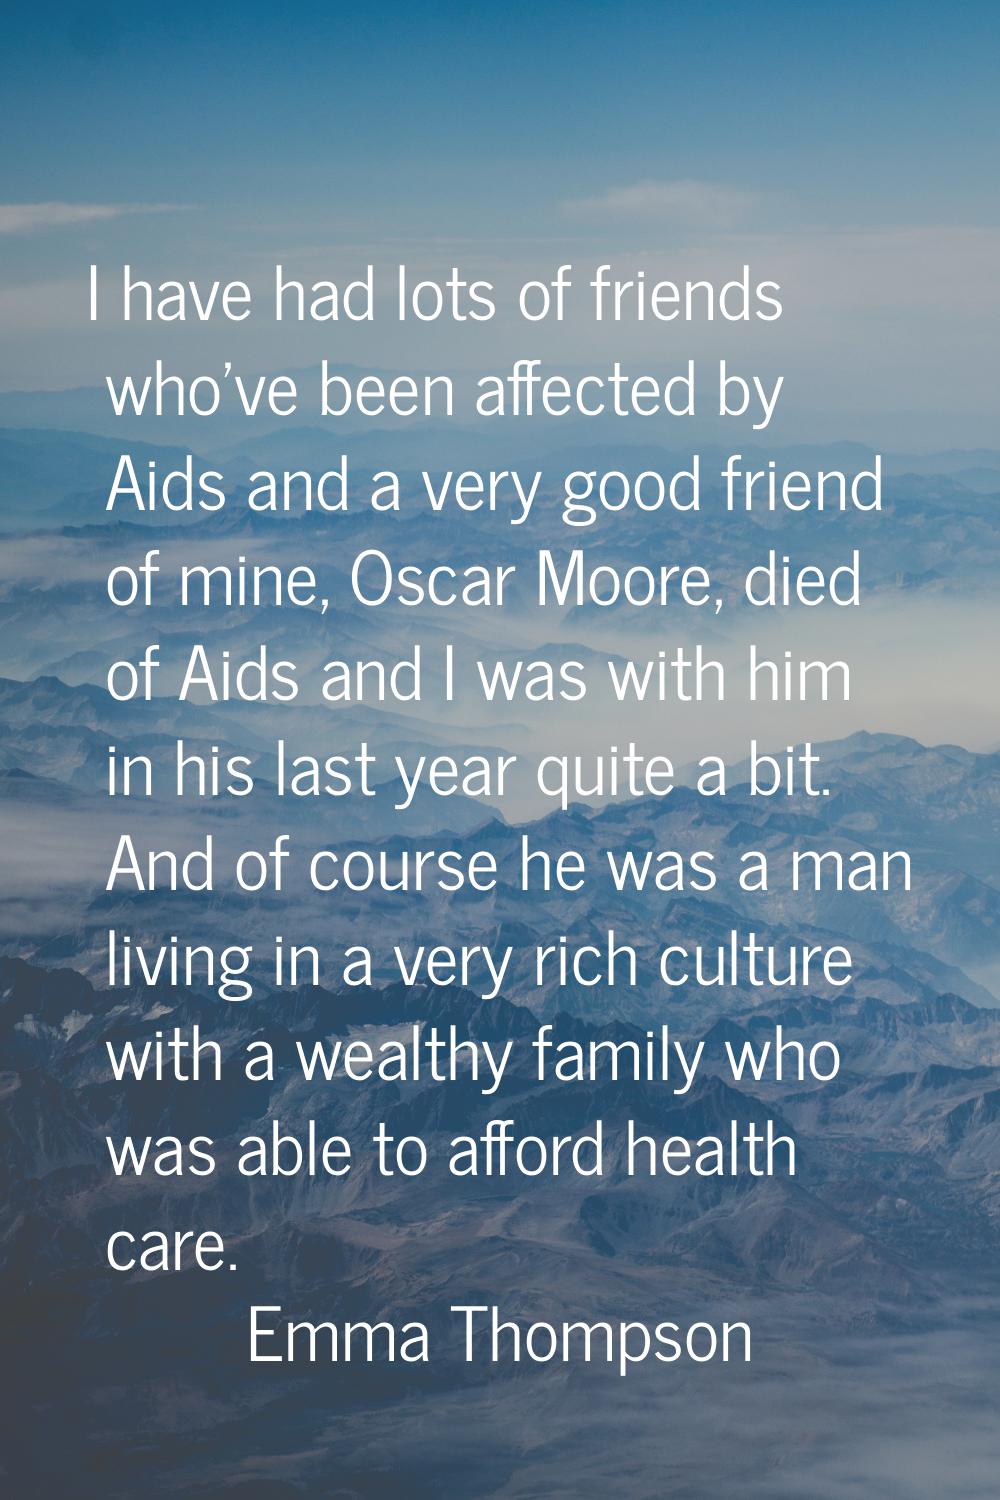 I have had lots of friends who've been affected by Aids and a very good friend of mine, Oscar Moore